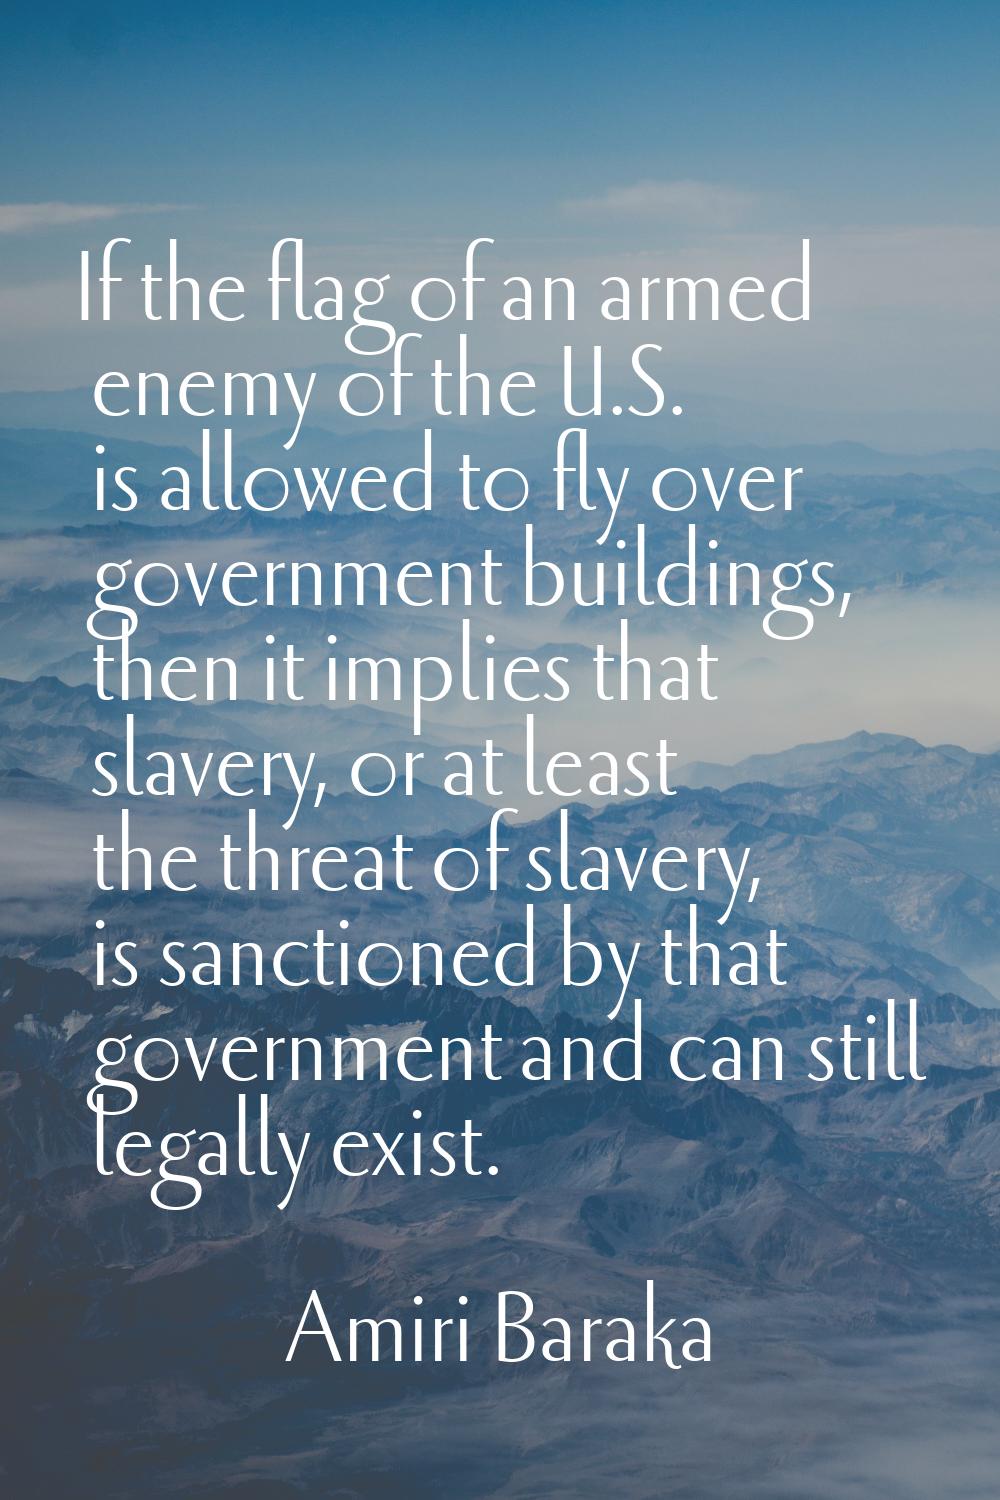 If the flag of an armed enemy of the U.S. is allowed to fly over government buildings, then it impl